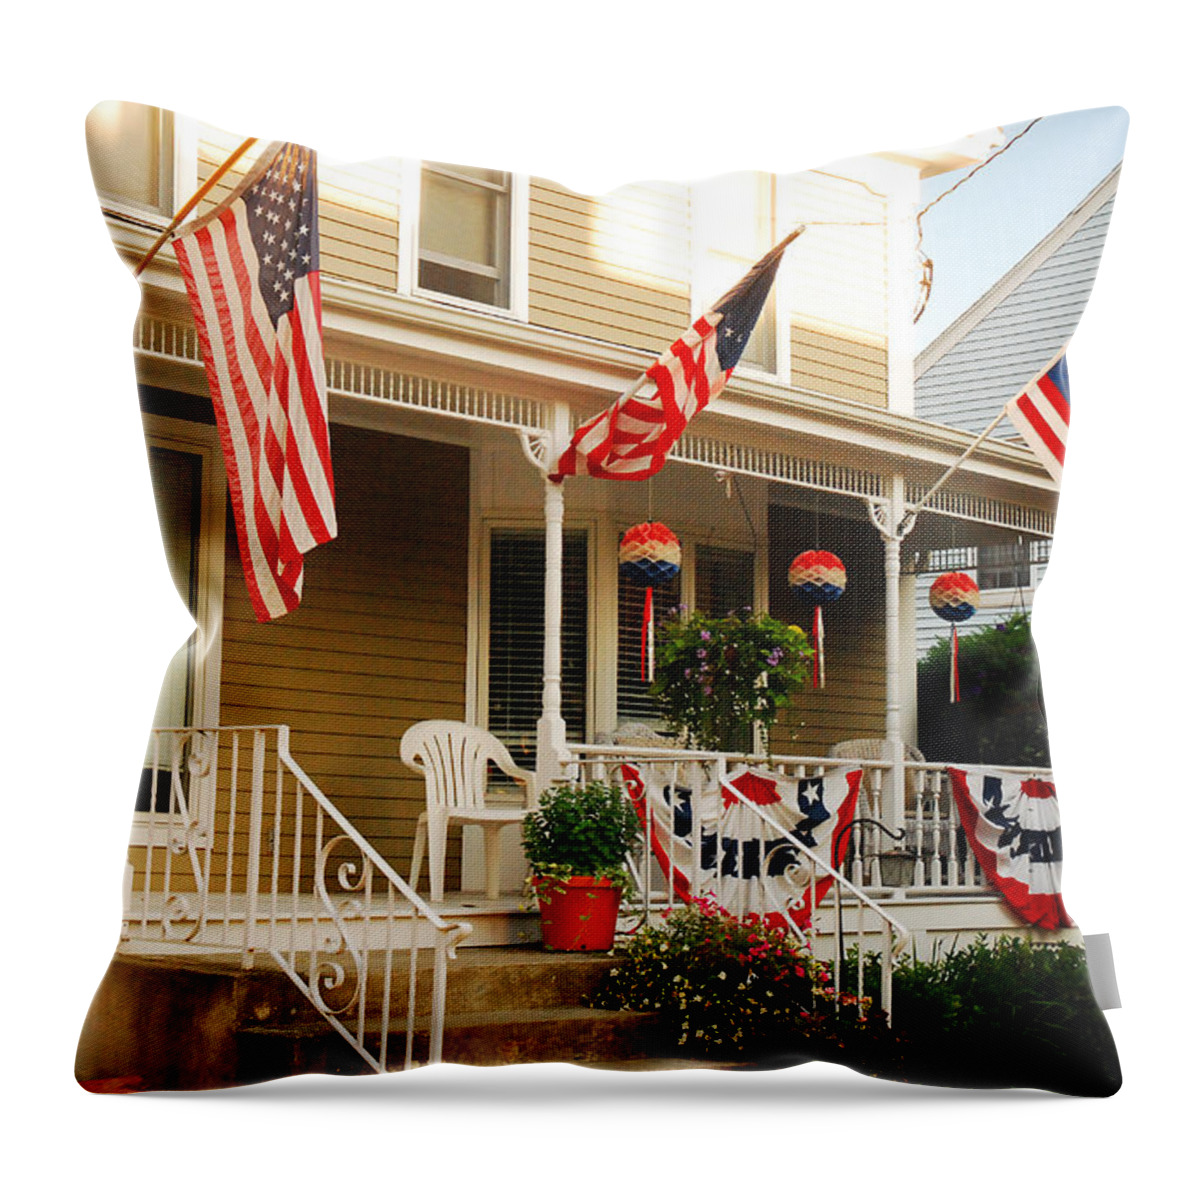 Untied Throw Pillow featuring the photograph Patriotic Home by James Kirkikis